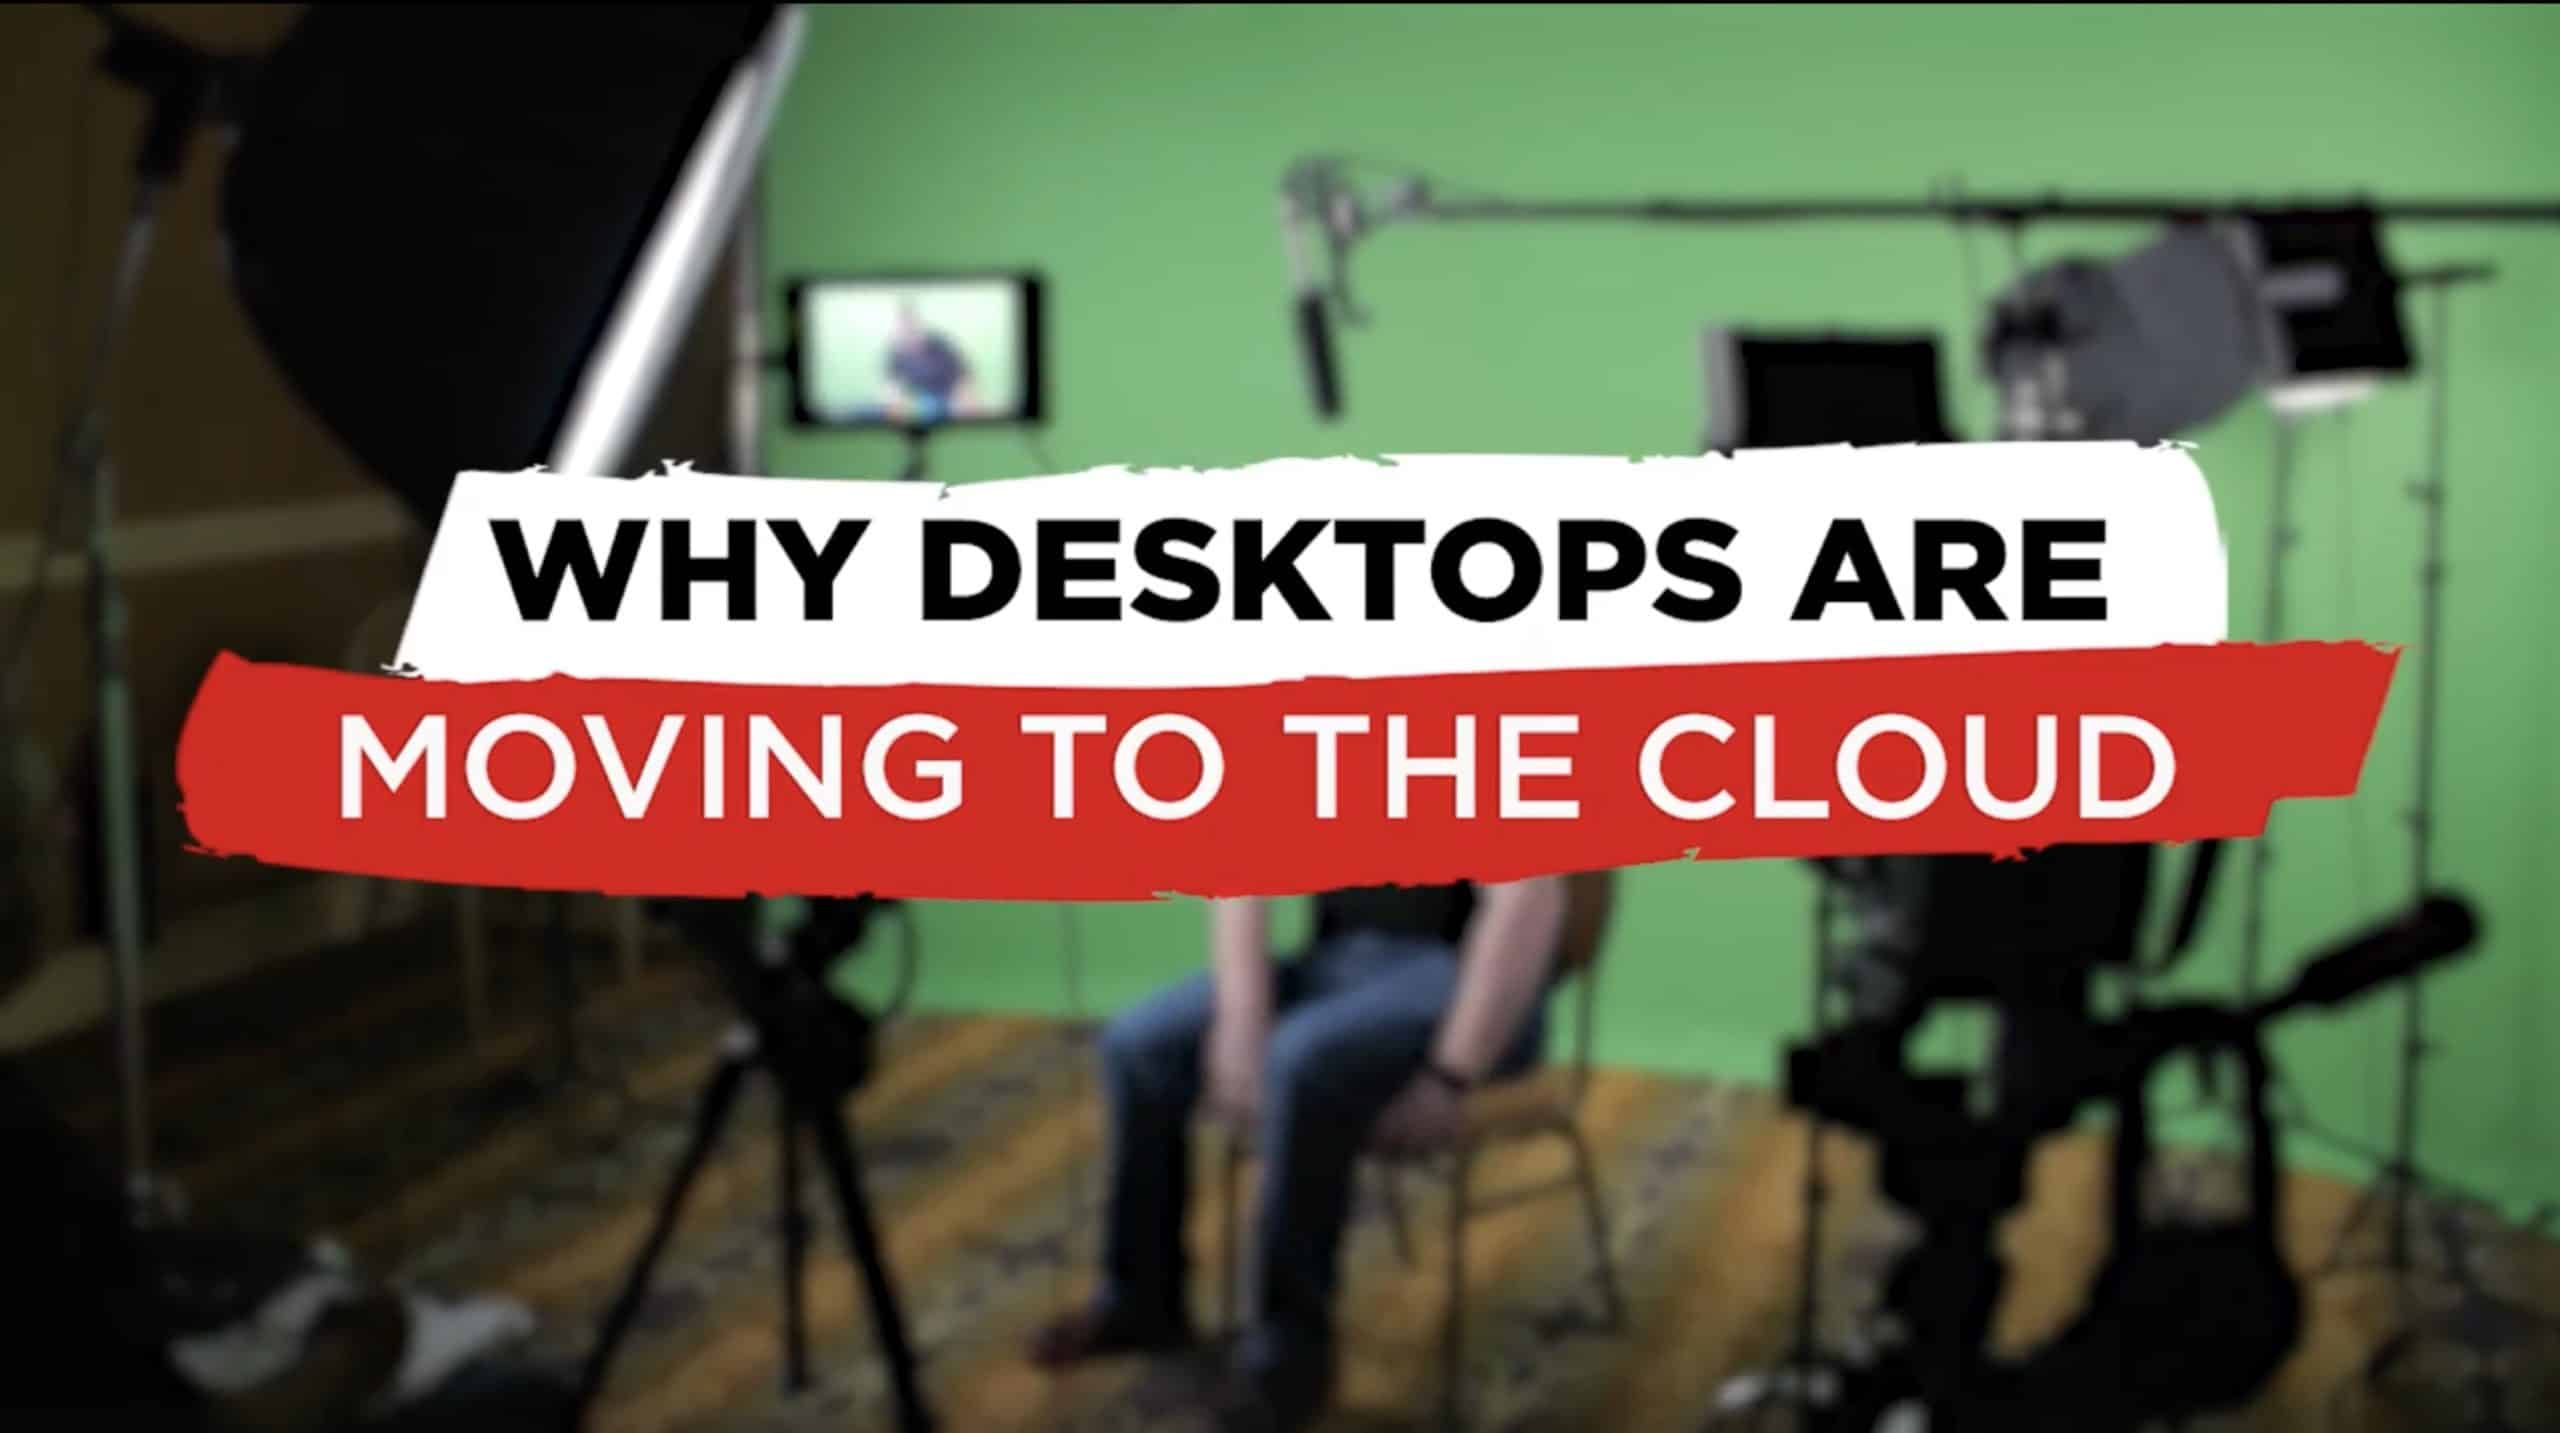 Why Desktops are Moving to the Cloud